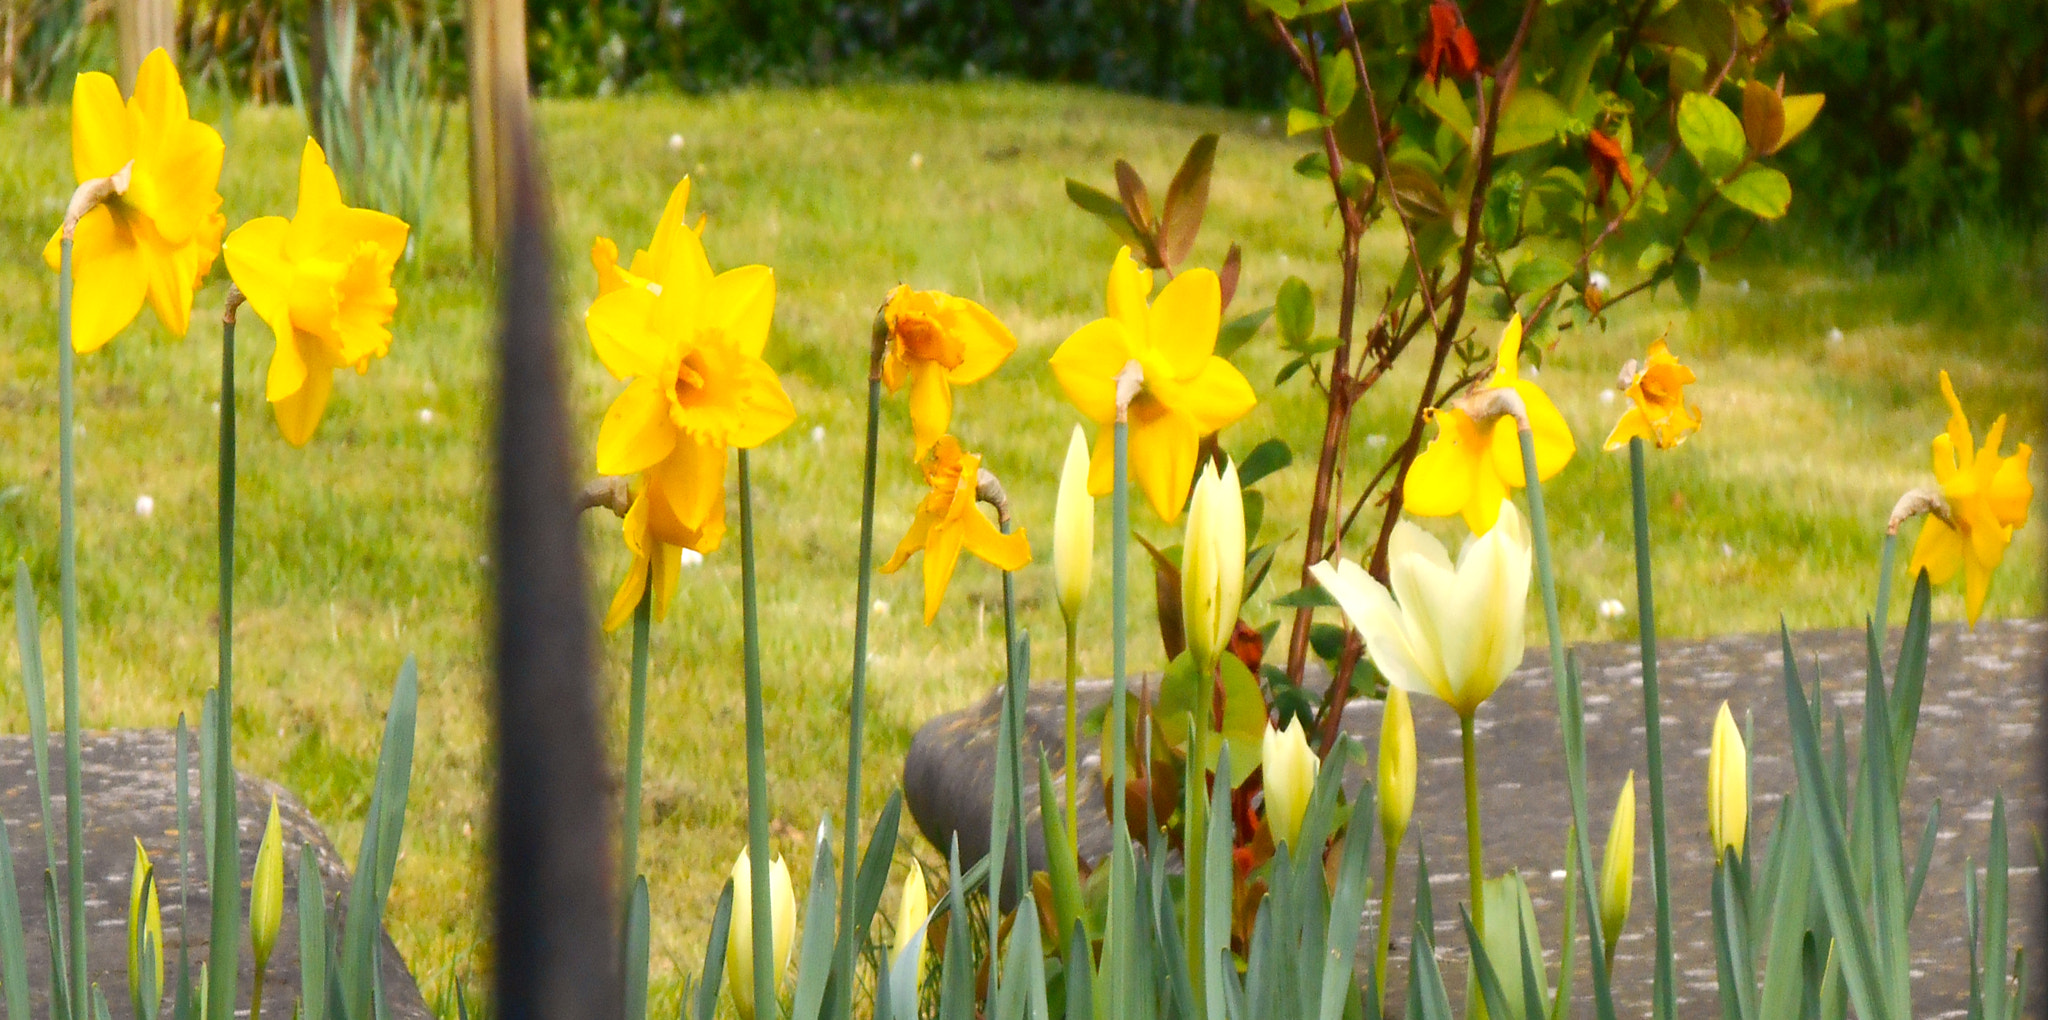 Nikon COOLPIX S3400 sample photo. Daffodils in churchyard and iron fence photography